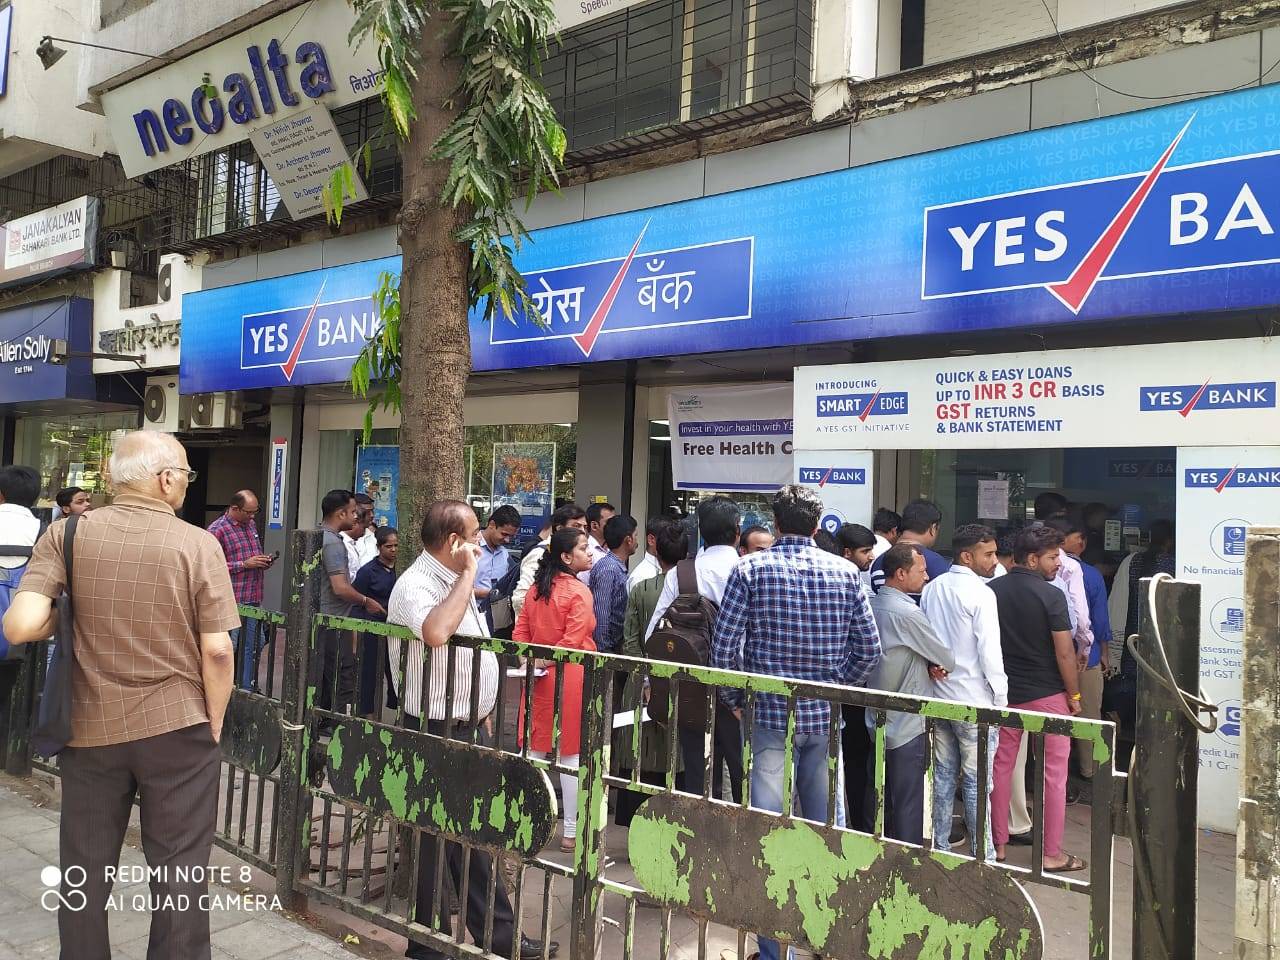 In pics: Customers of Yes Bank line up outside ATMs for cash fearing